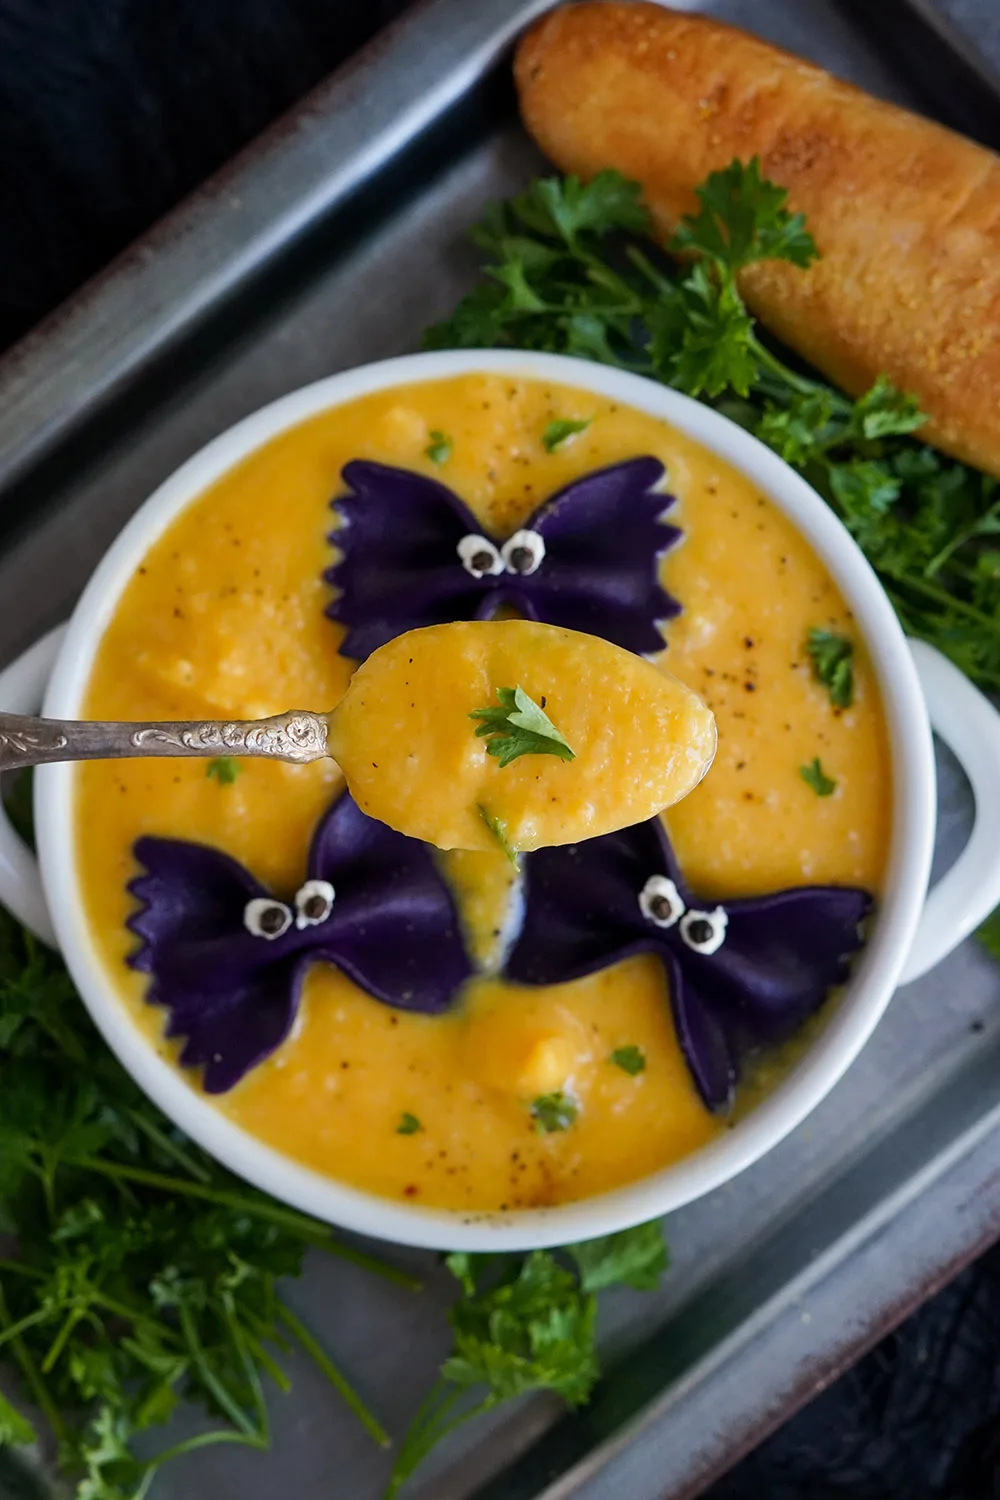 Spoon raised over bowl of Halloween butternut squash soup with pasta bats.